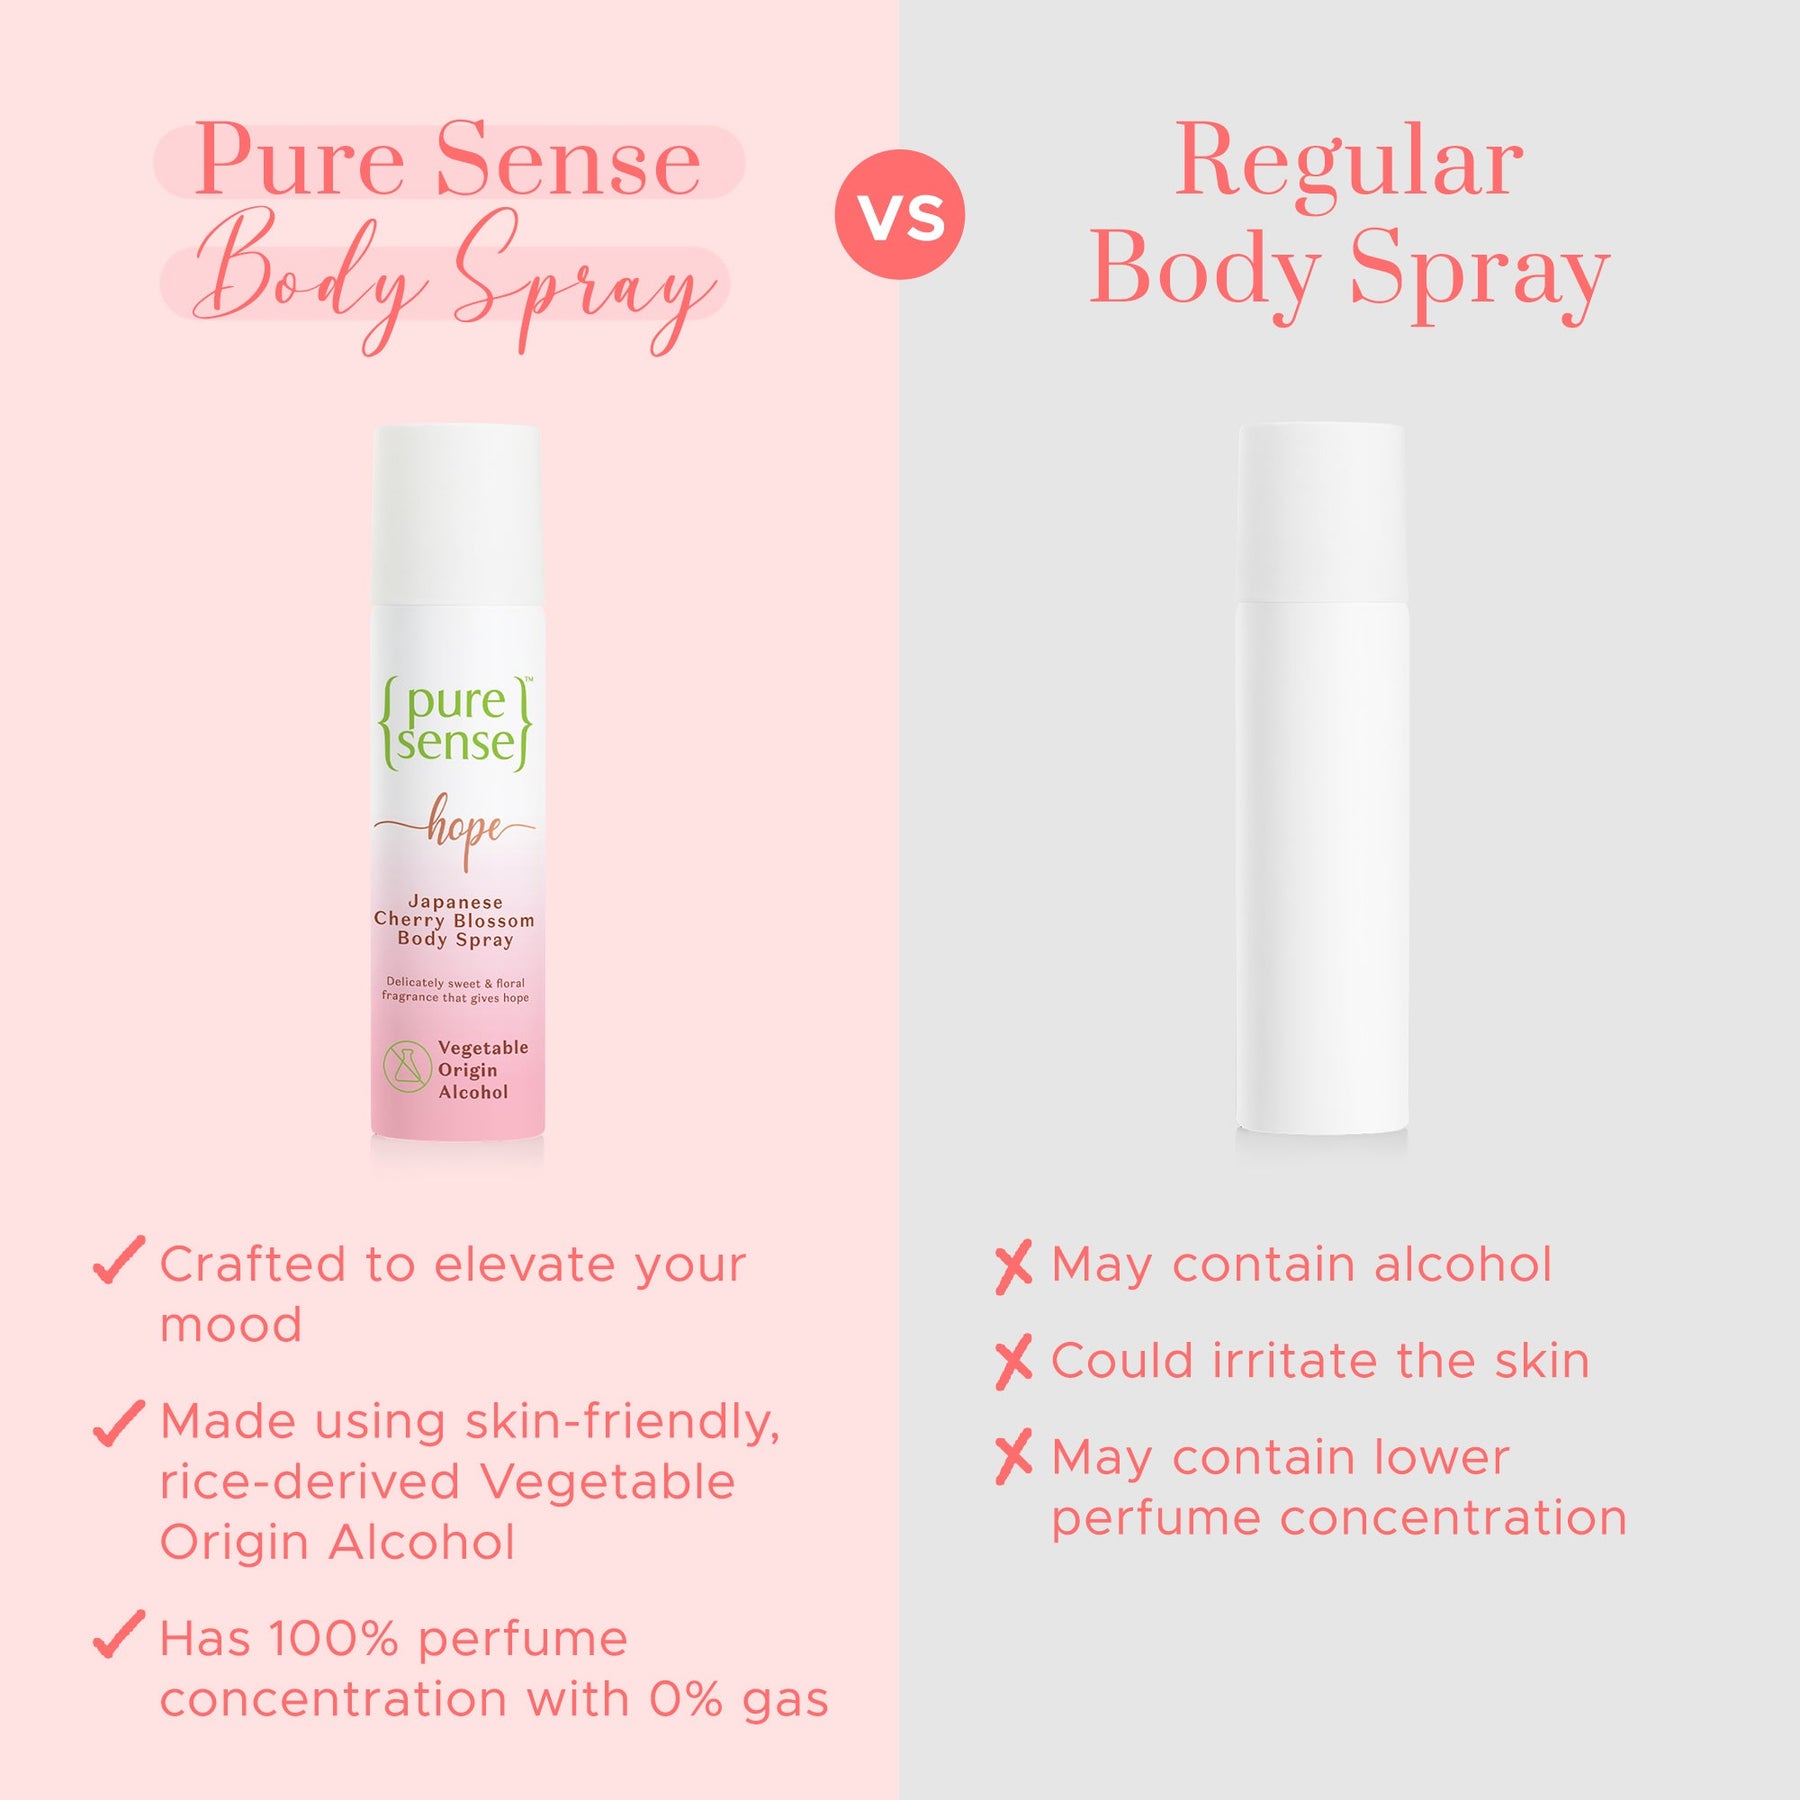 [CRED] Hope Japanese Cherry Blossom Body Spray | Paraben & Sulphate Free | From the makers of Parachute Advansed | 150ml